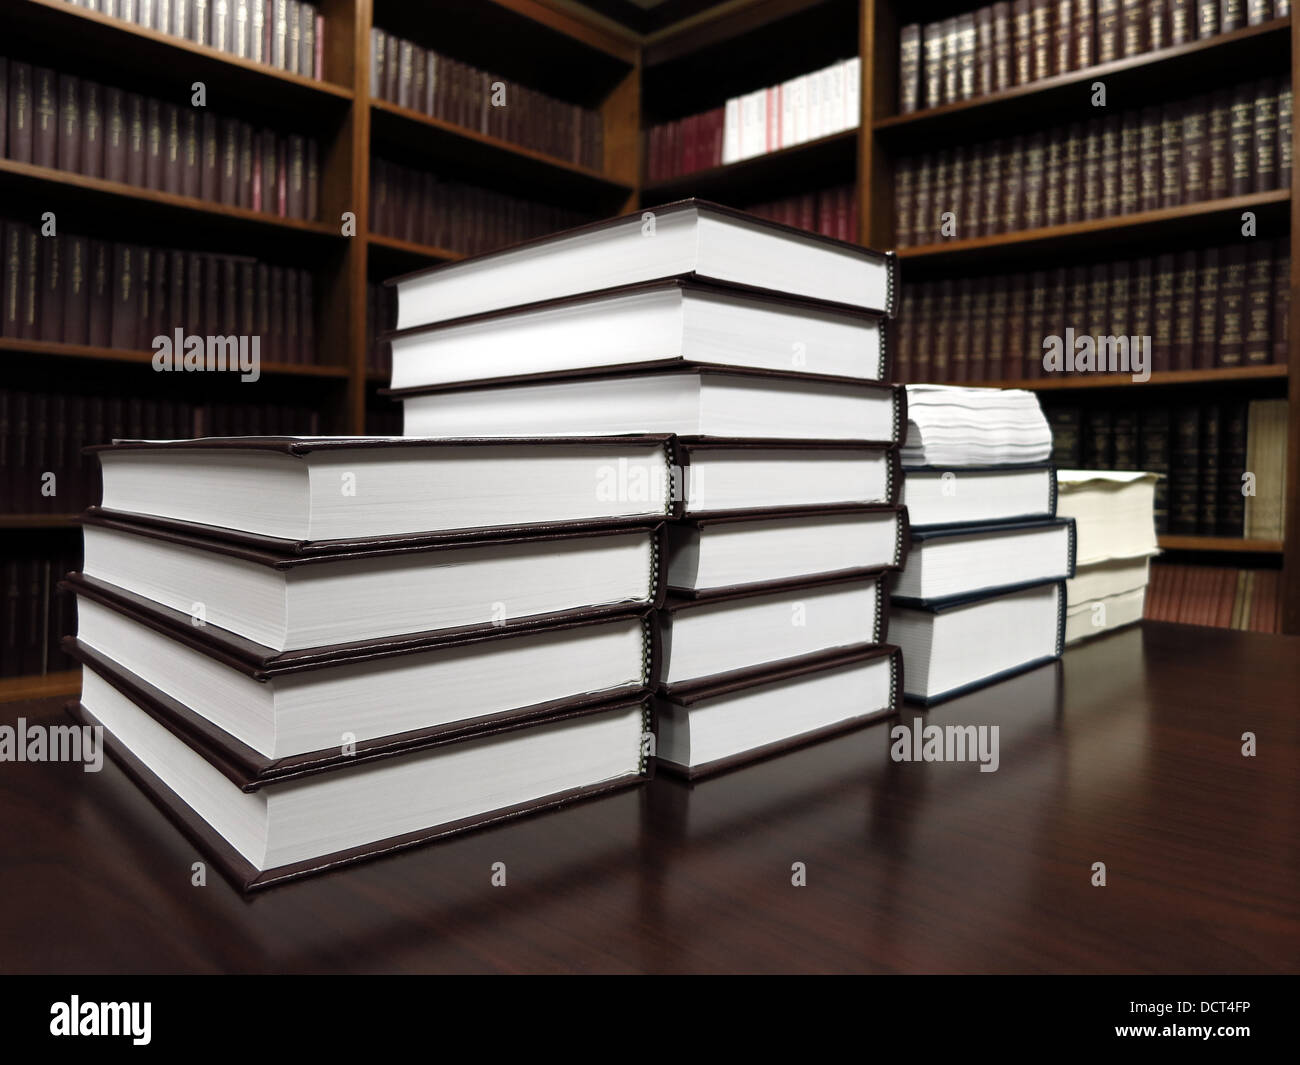 Stack of old books on a desk or table in a library Stock Photo